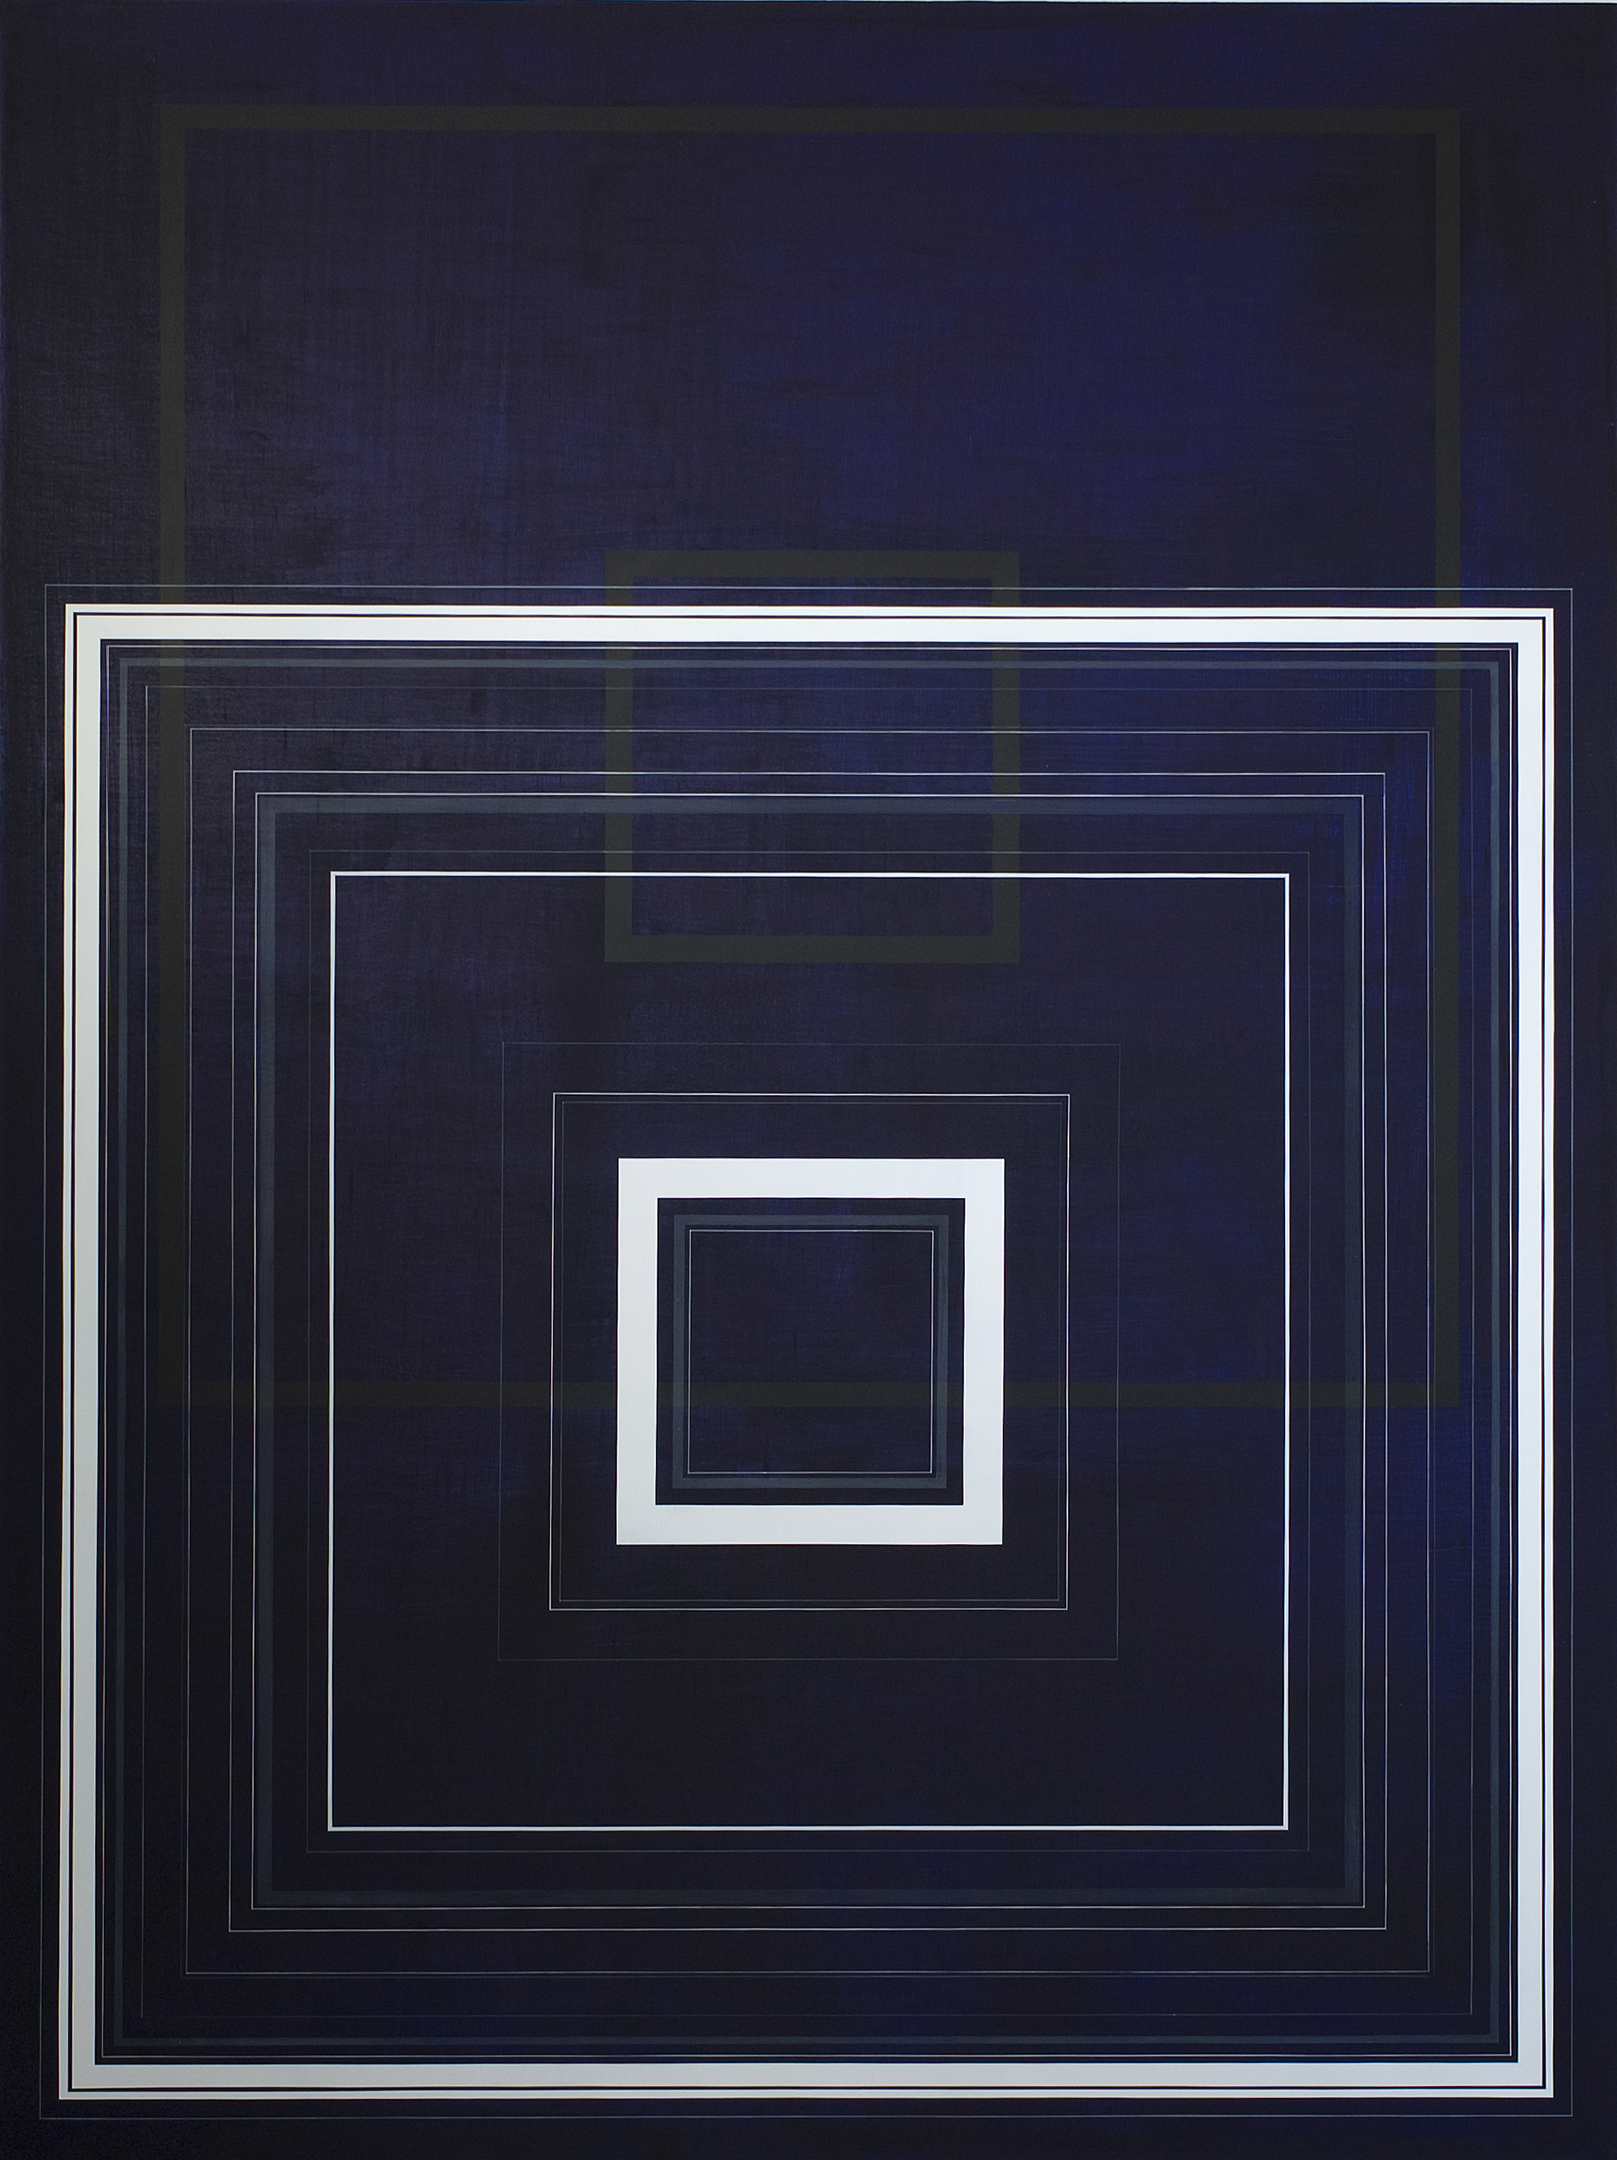  Black Blue and Square, 2009, 80x60 